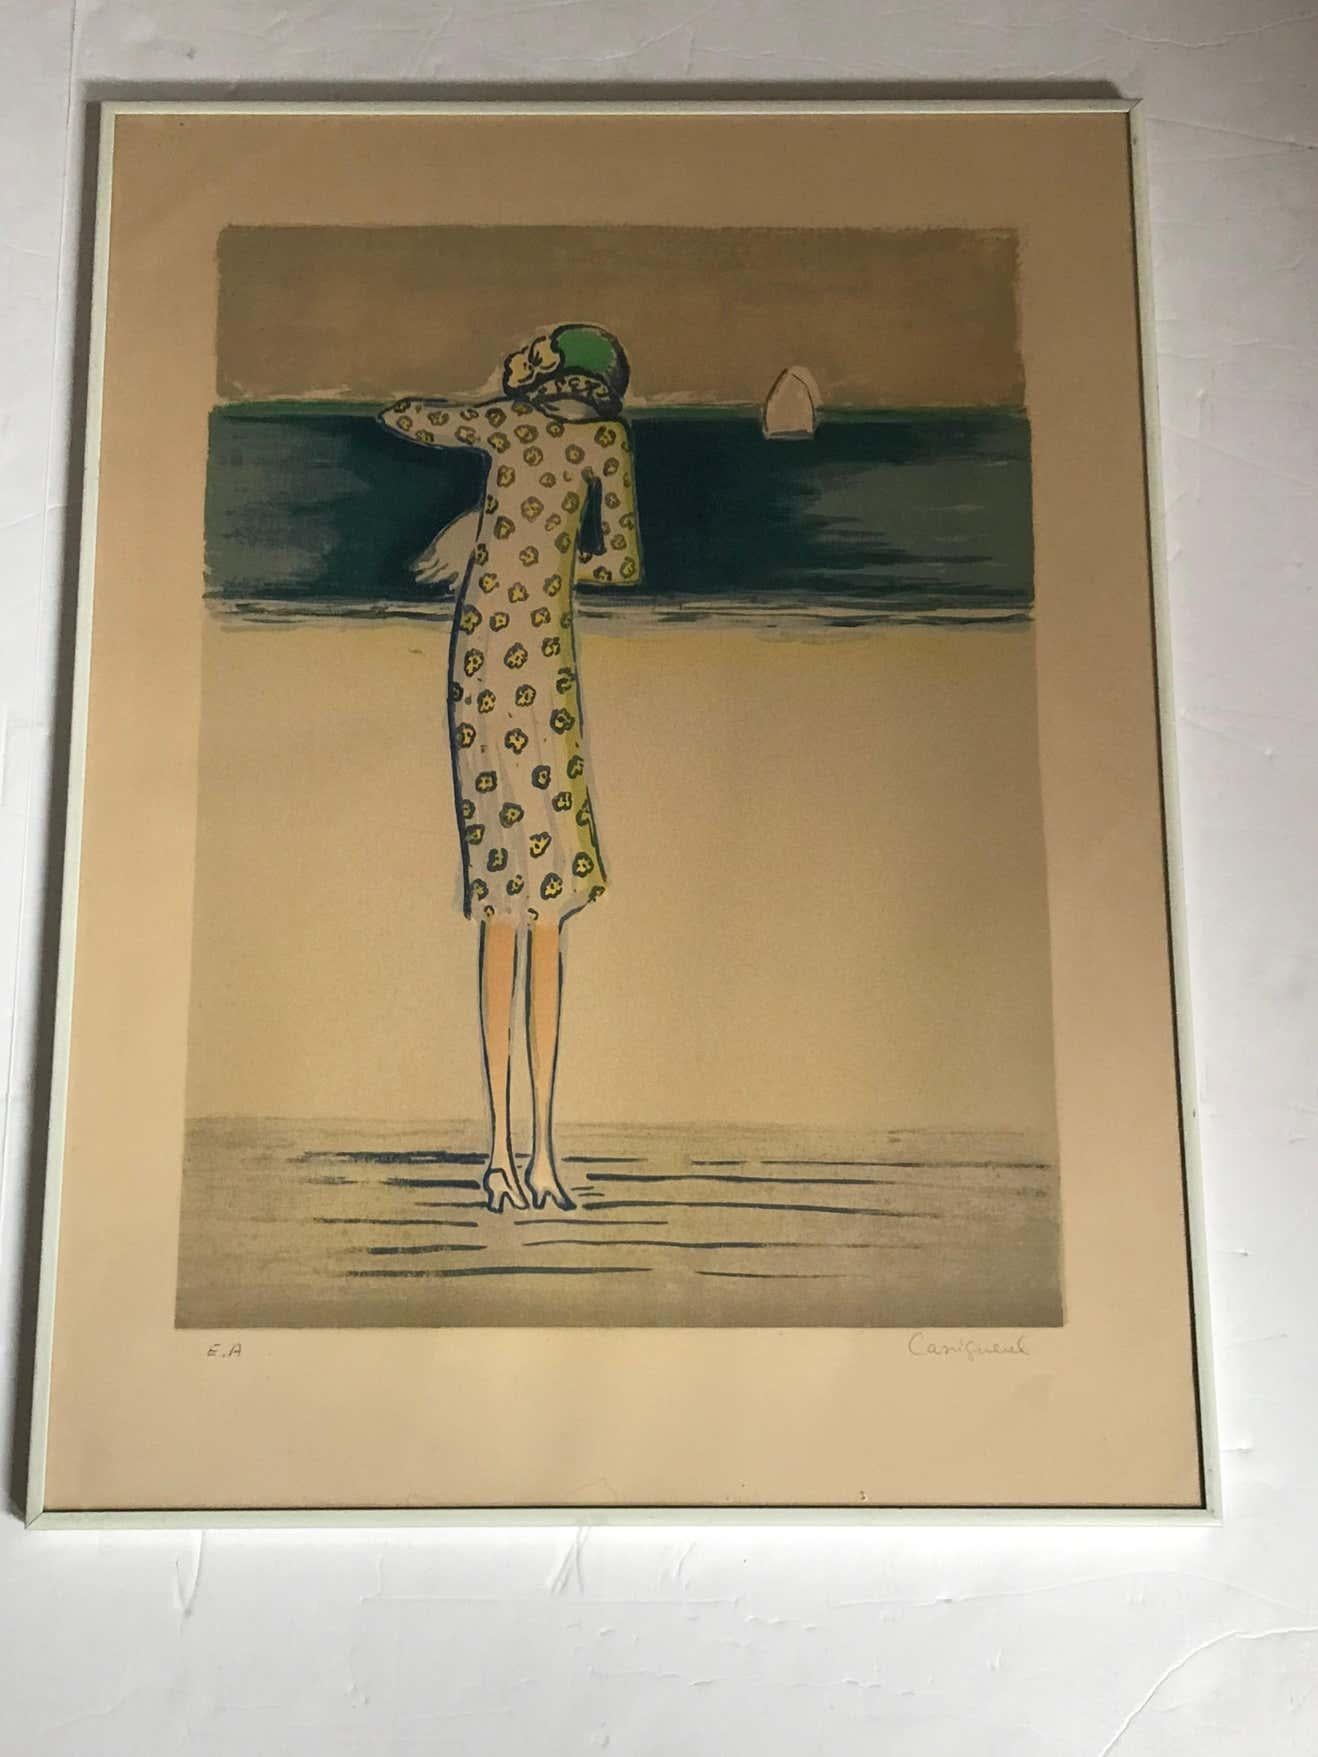 Artist Proof lithograph signed by the painter and marked E.A (epreuve d'artiste)
This piece has a matching one. See last picture.

Cassigneul was born in 1935 in Paris. He studied at l’École Nationale Supérieure des Beaux-Arts de Paris and was later